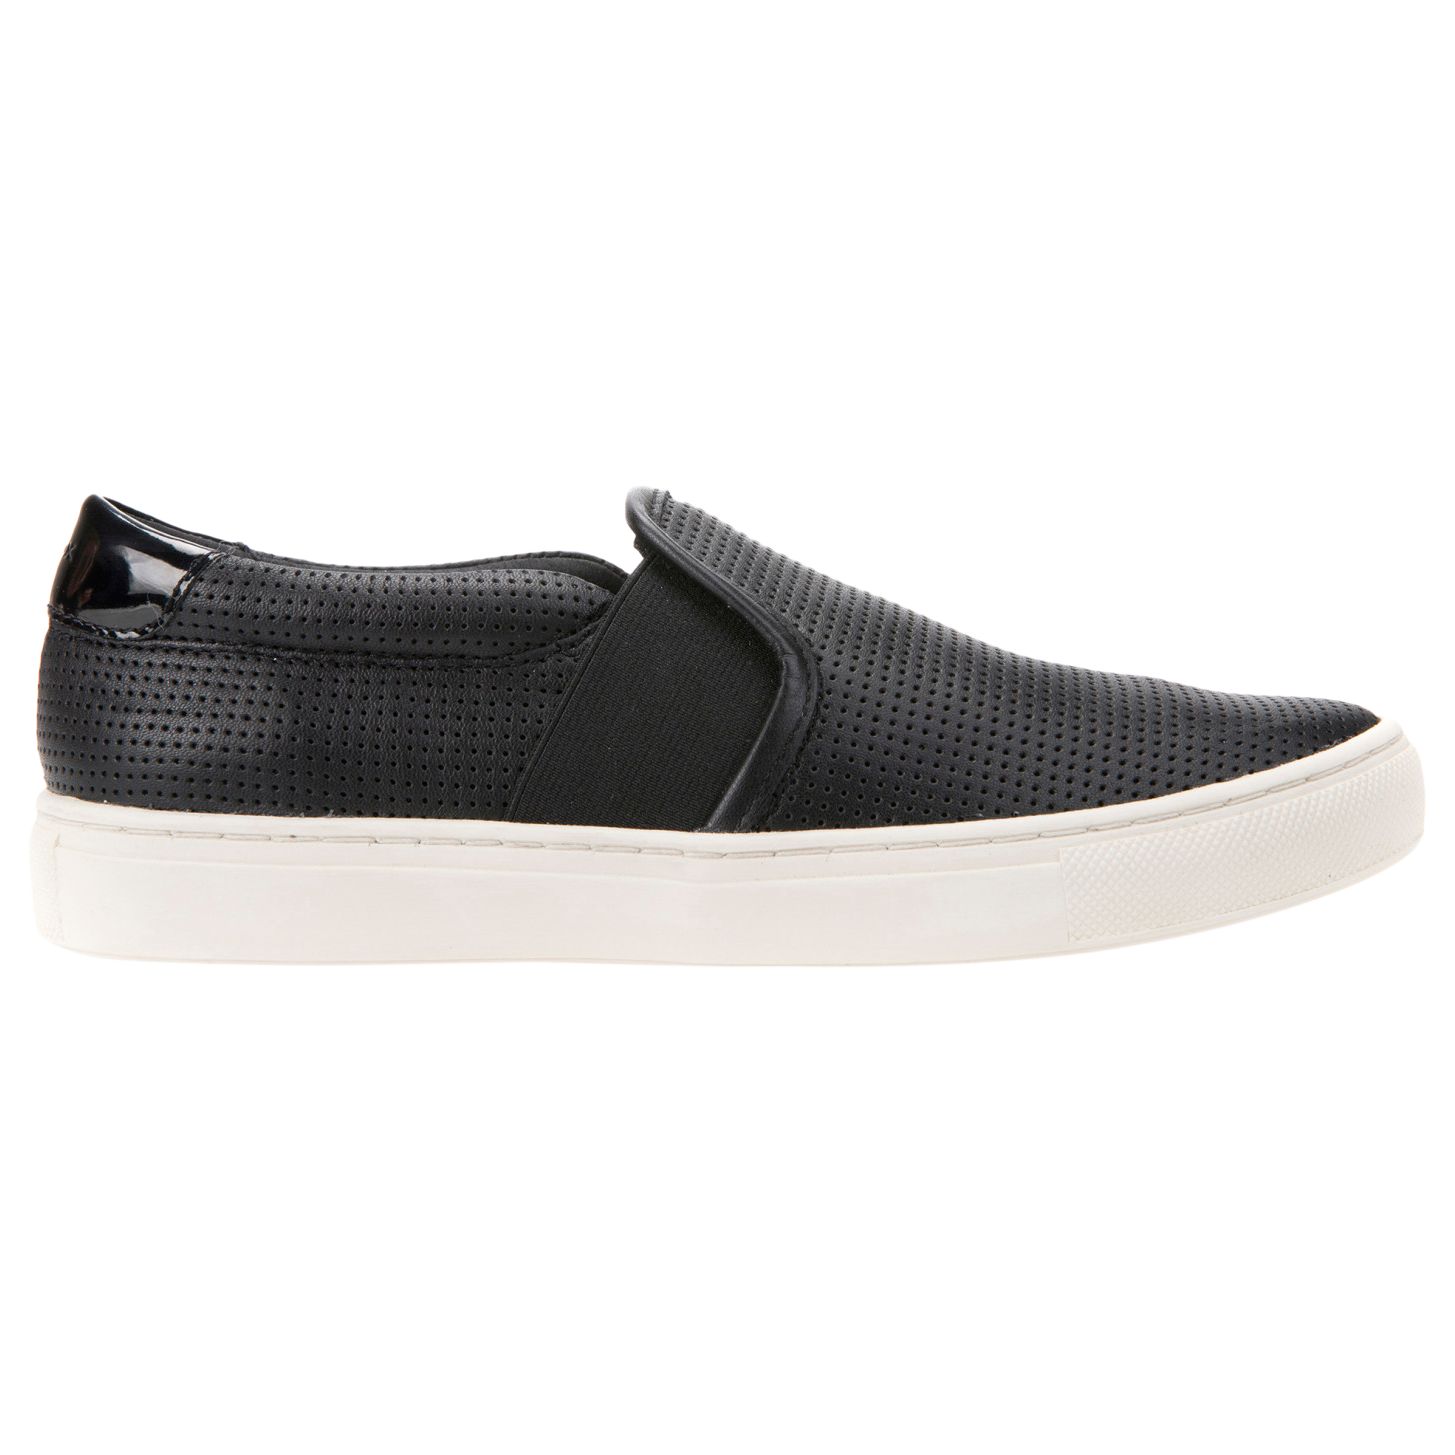 Trysure Leather Slip On Trainers, Black 